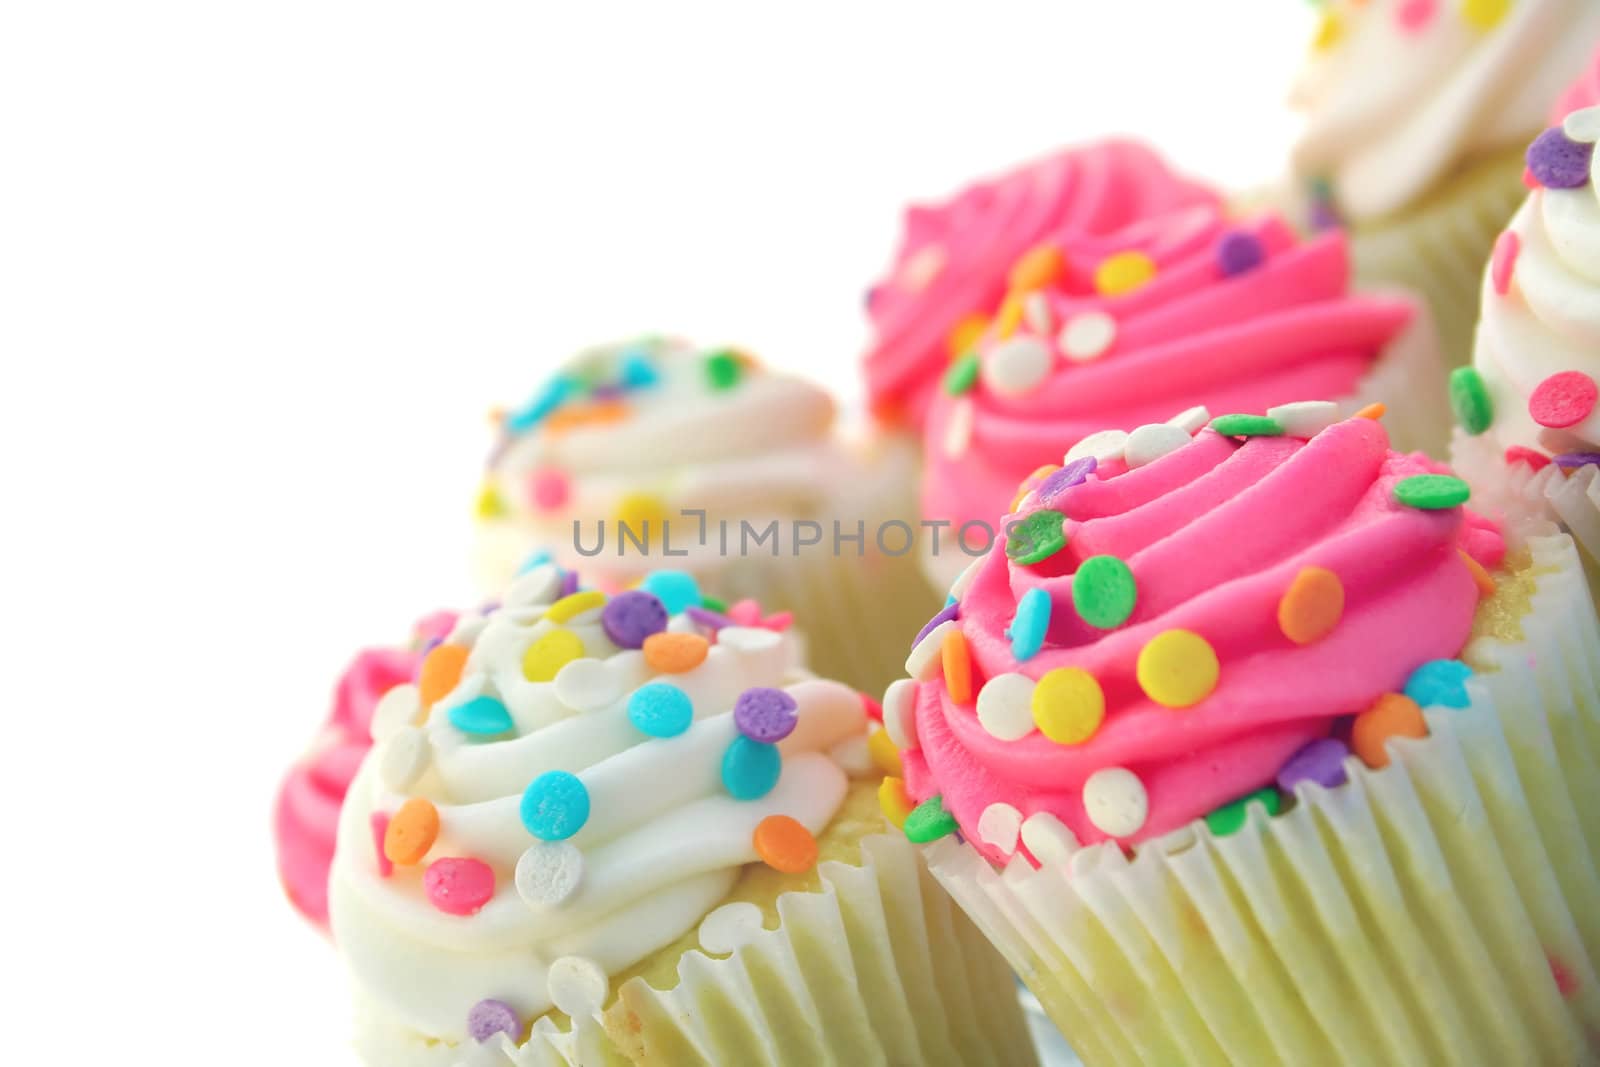 Cupcakes by thephotoguy